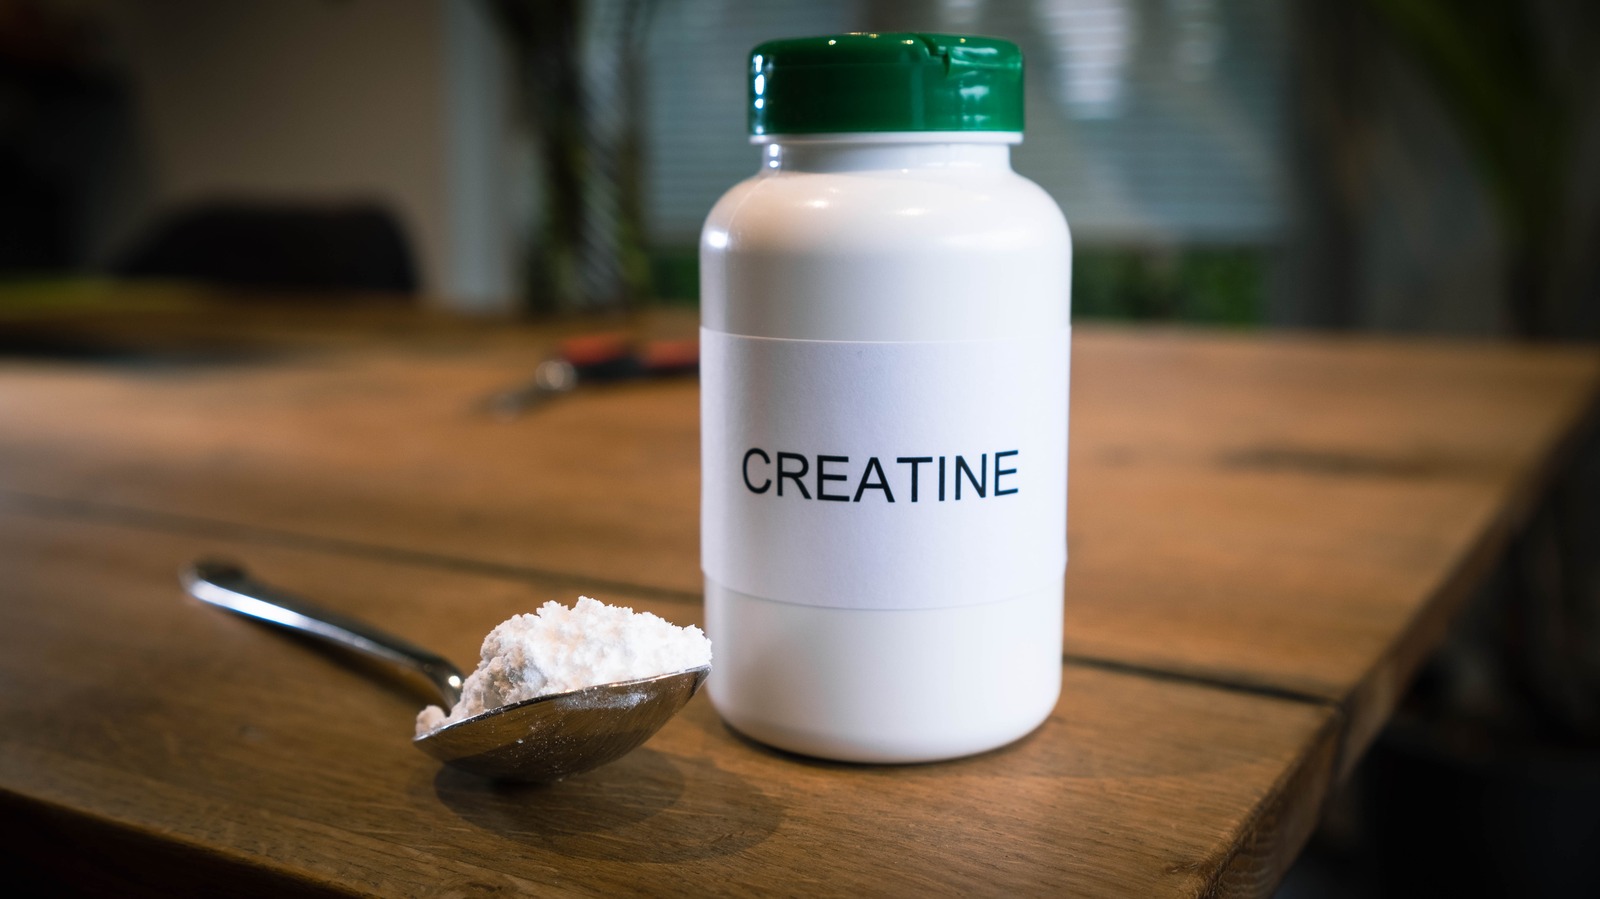 Can You Take Too Much Creatine?